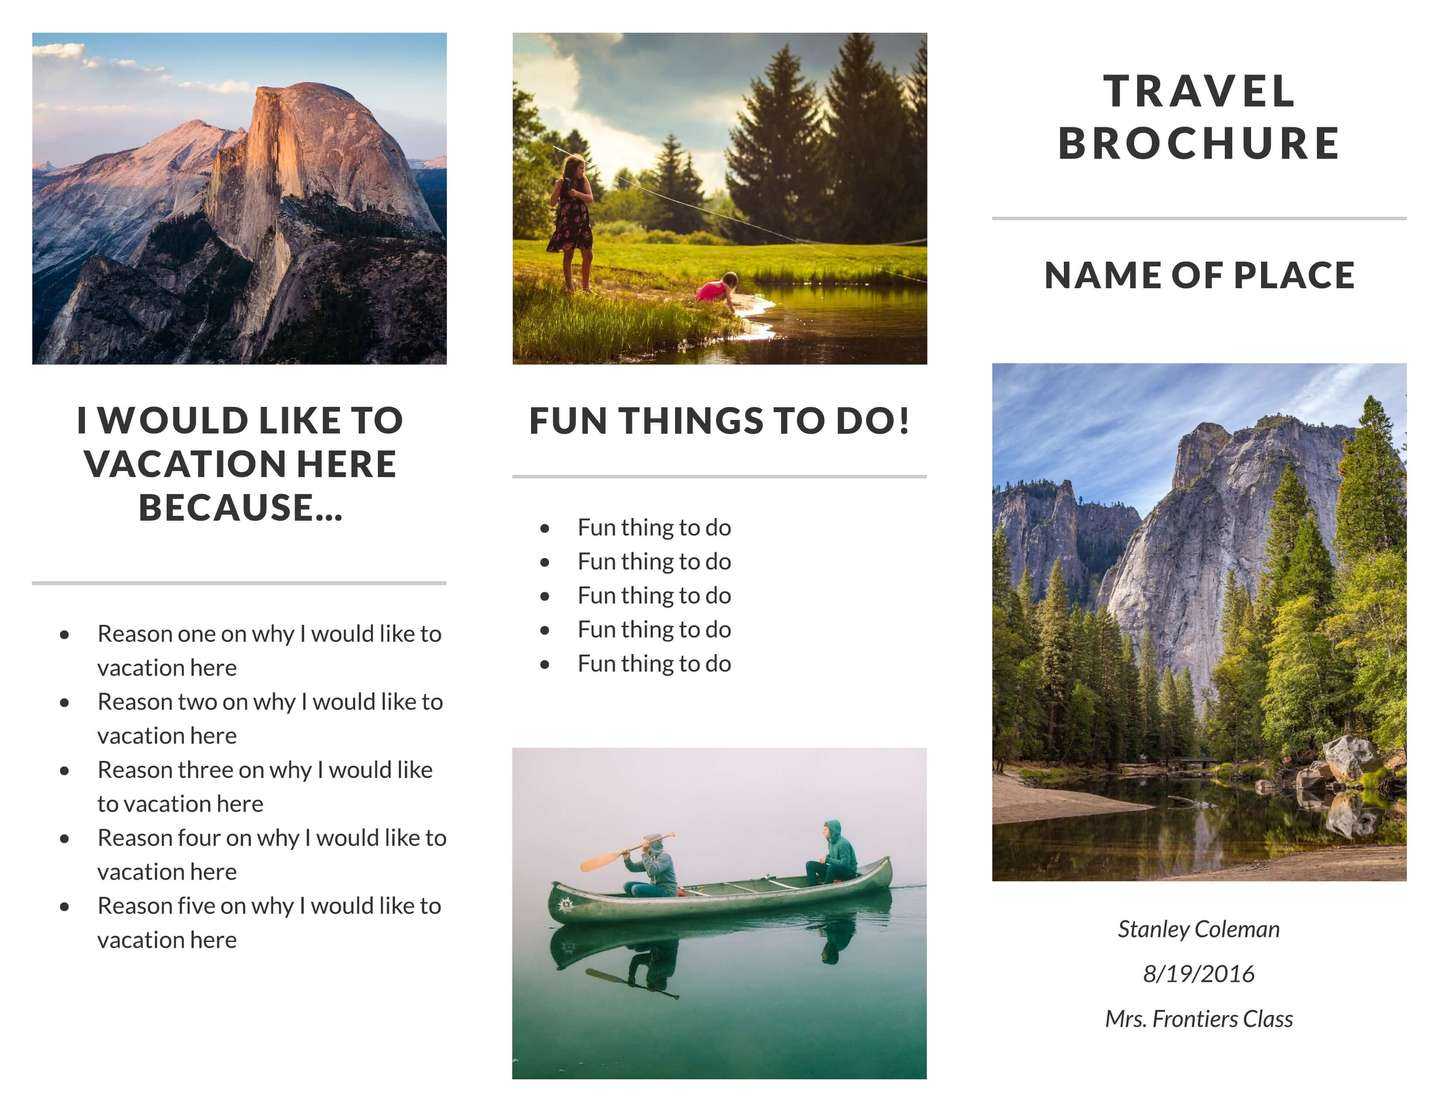 Free Travel Brochure Templates & Examples [8 Free Templates] Within Travel And Tourism Brochure Templates Free